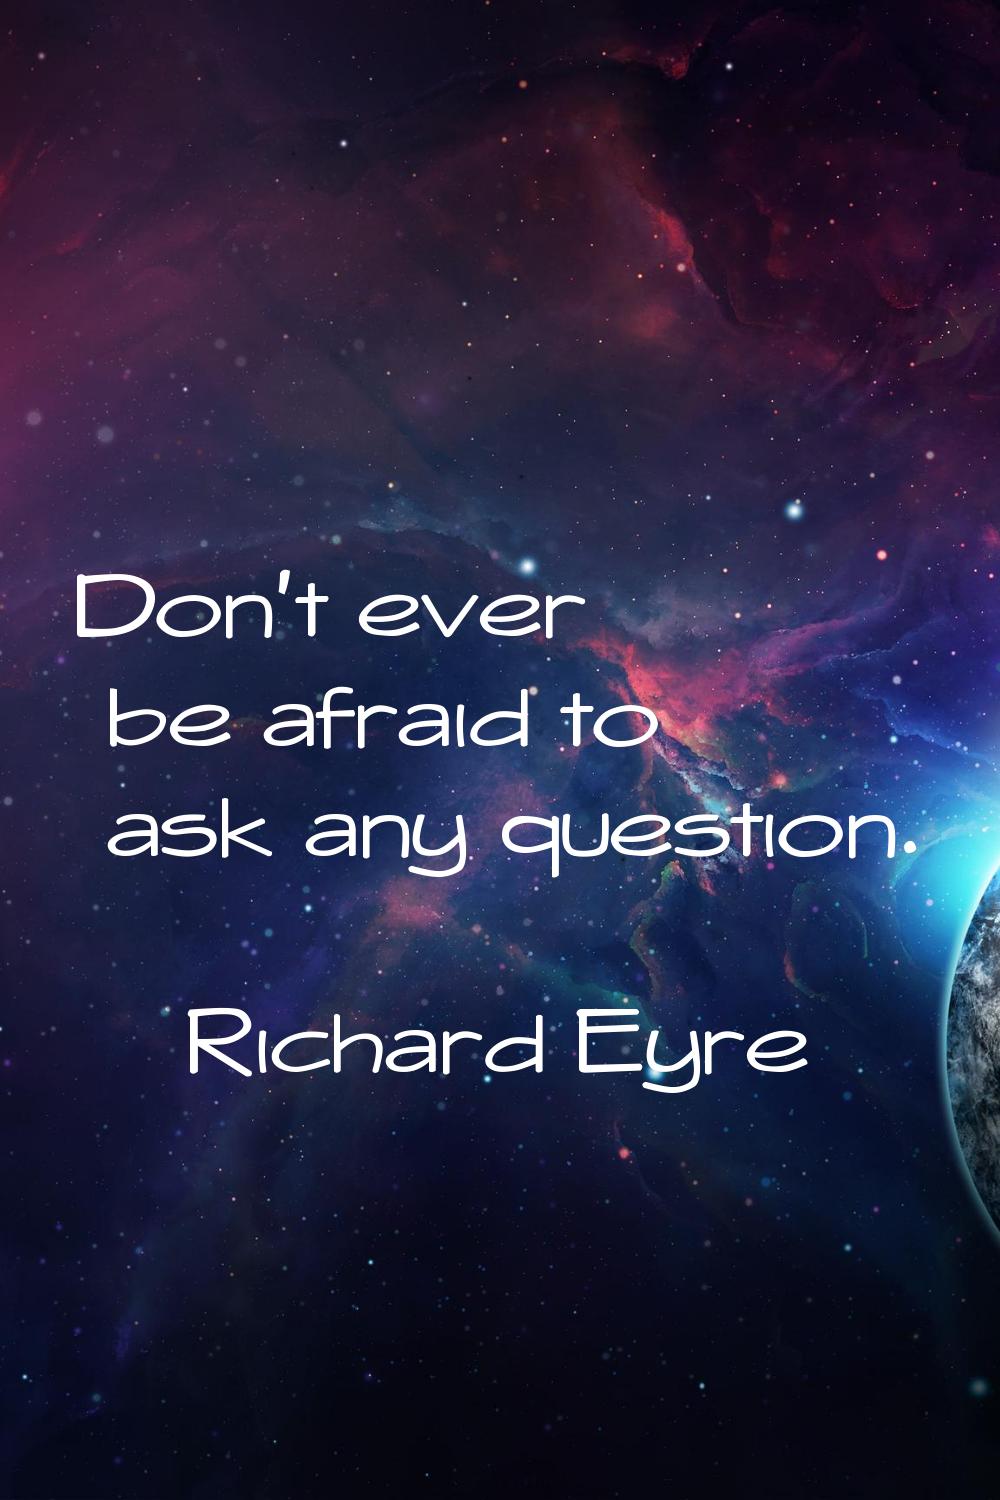 Don't ever be afraid to ask any question.